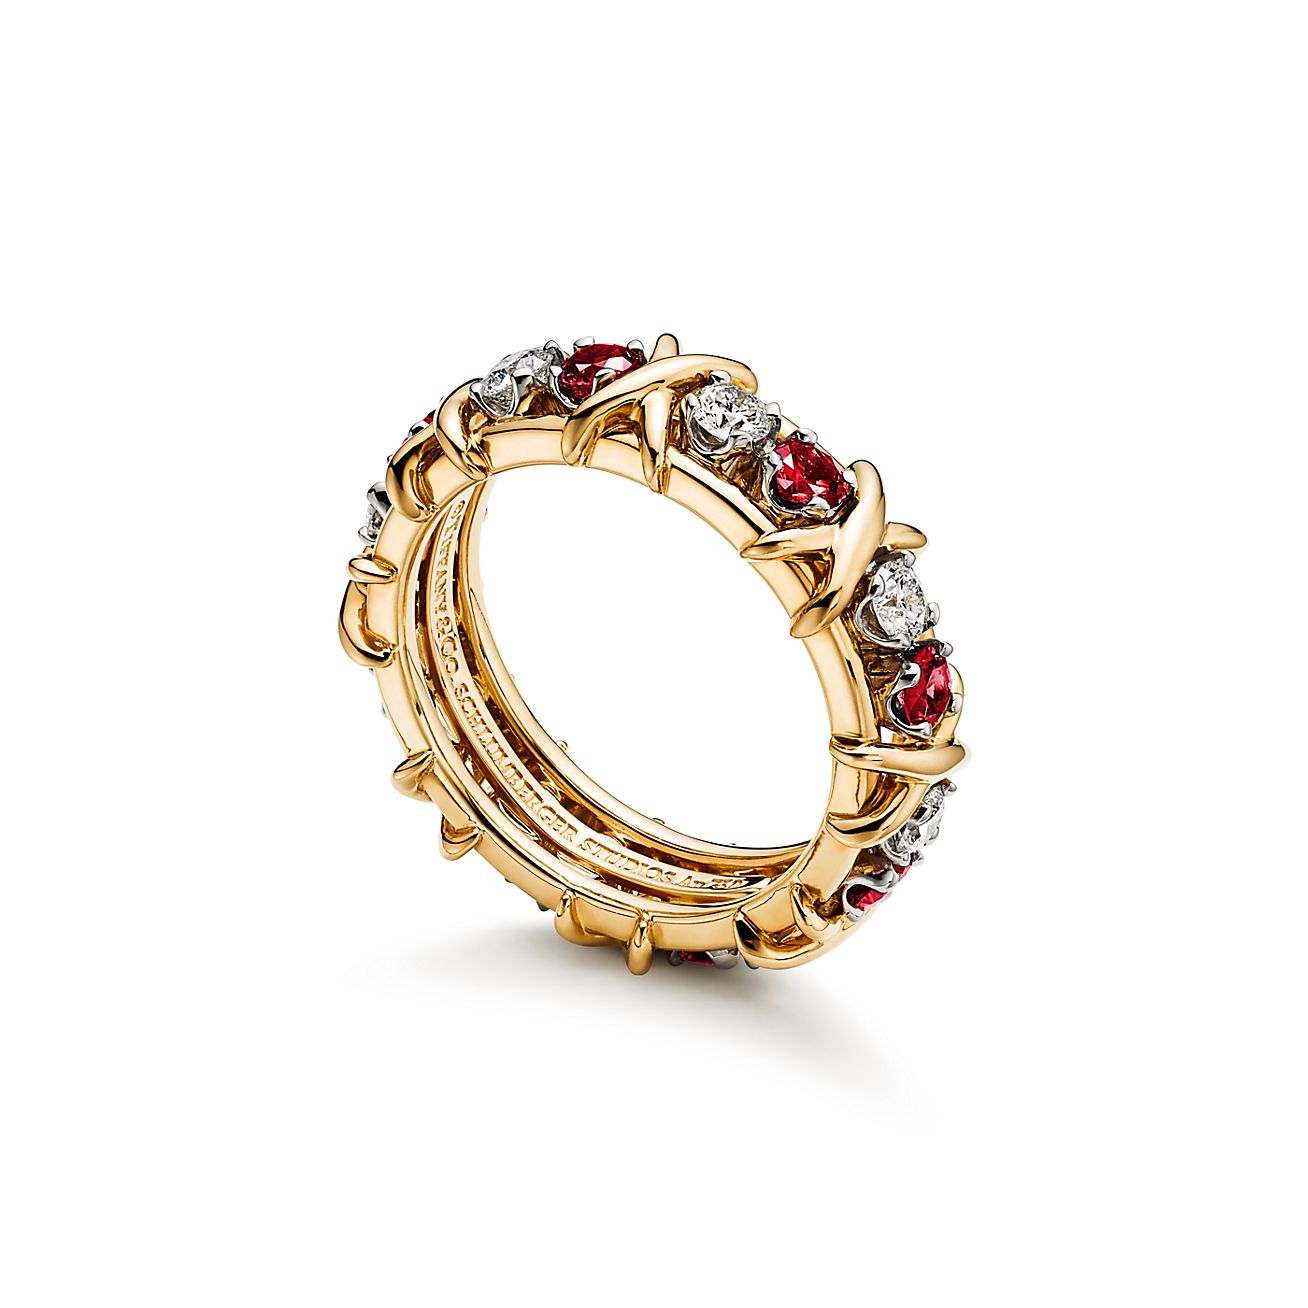 Jean Schlumberger by Tiffany Sixteen Stone Ring